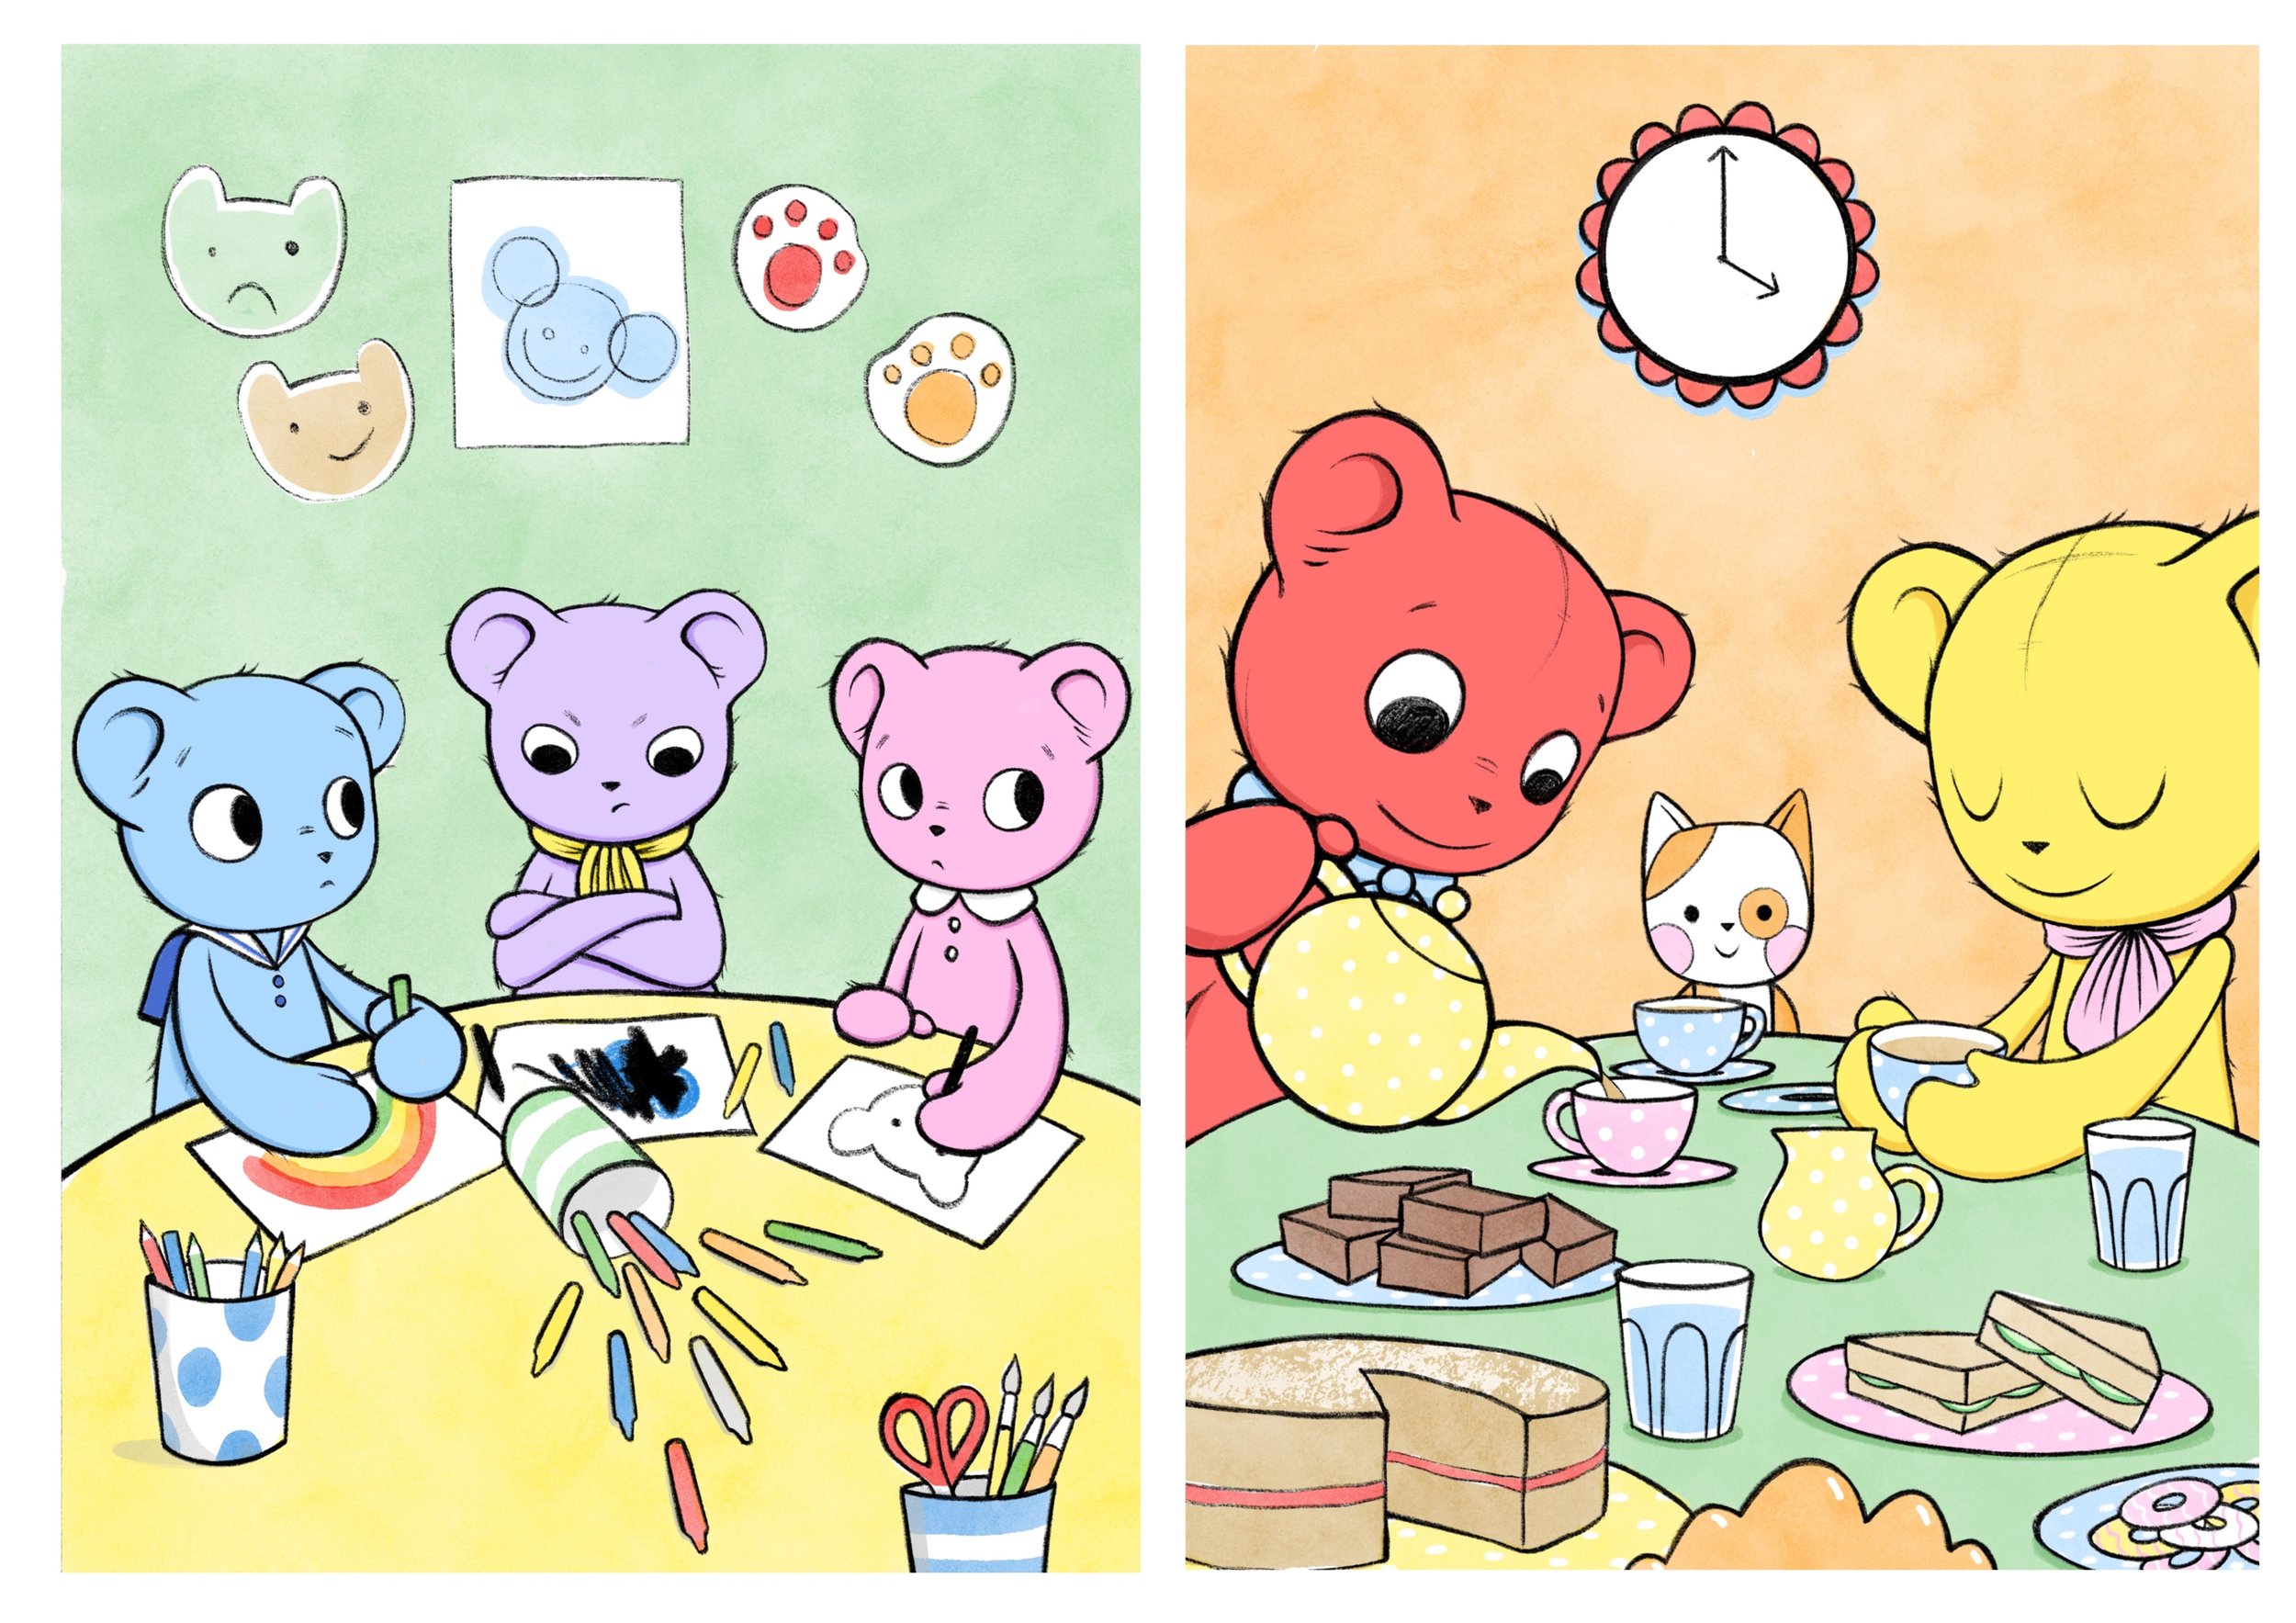 The Good Manners Bears - 'Rude Bear' & 'Table Manners Bear' page spreads 2020